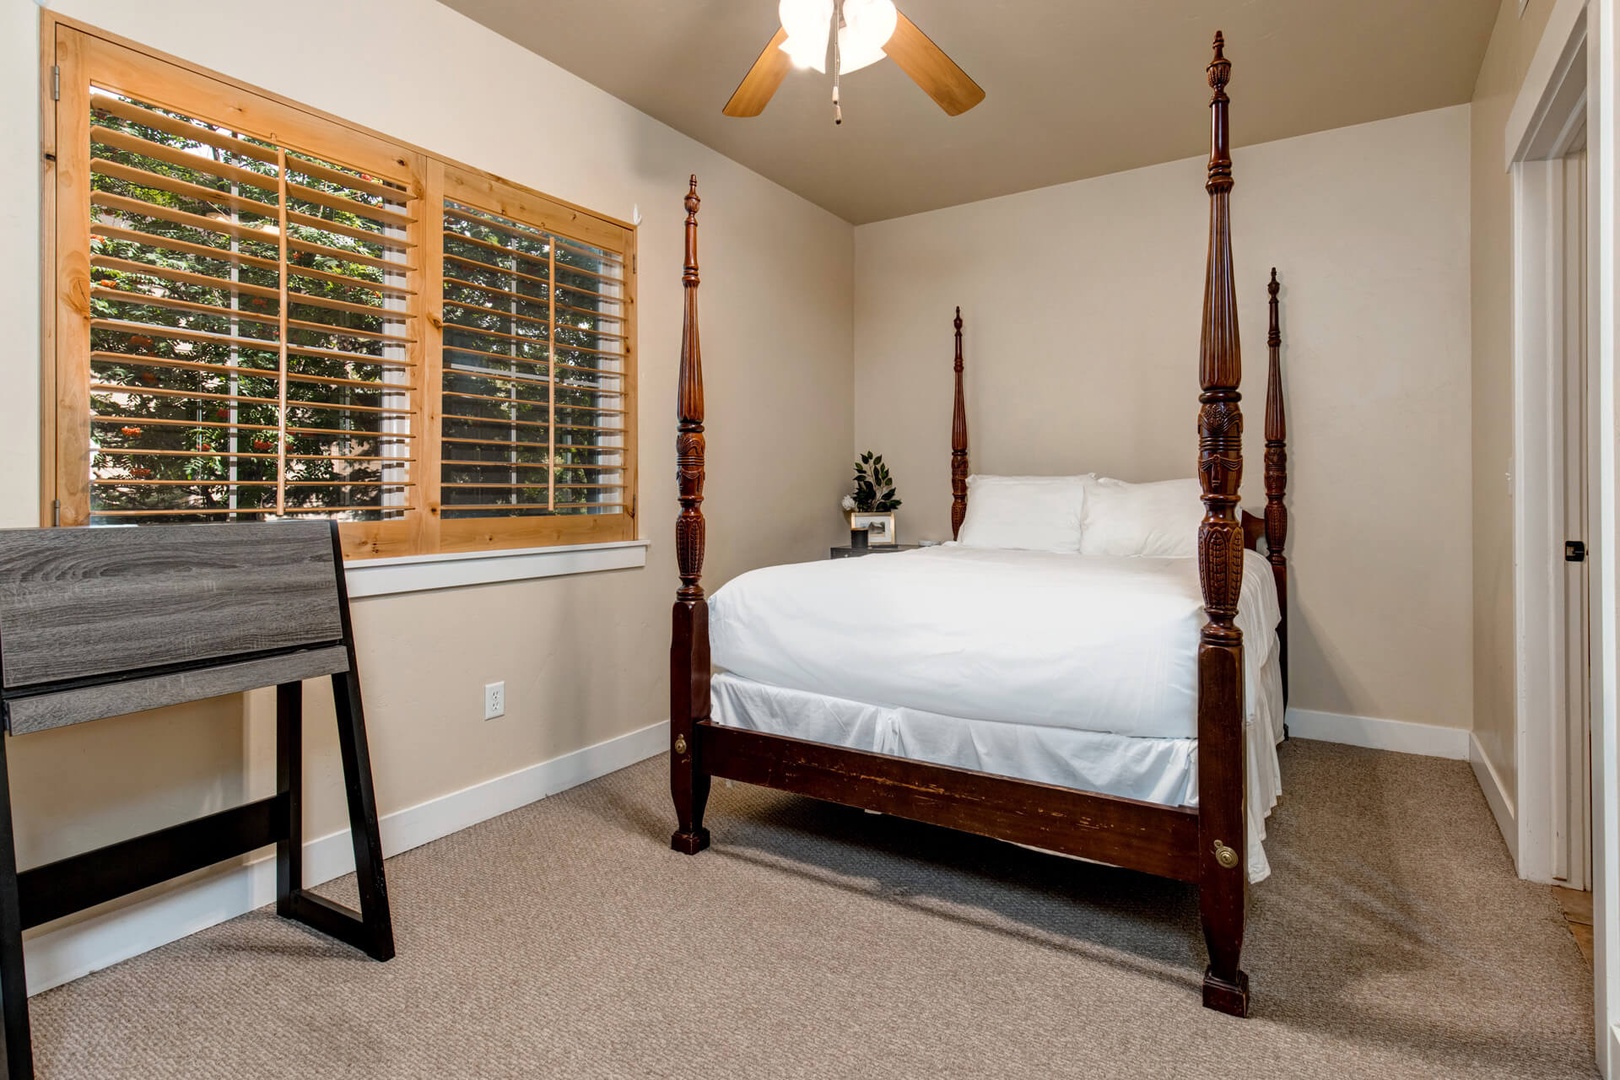 Bear Hollow Lodges 1104: The master bedroom has a Queen-sized bed with luxurious bedding and full attached bathroom.